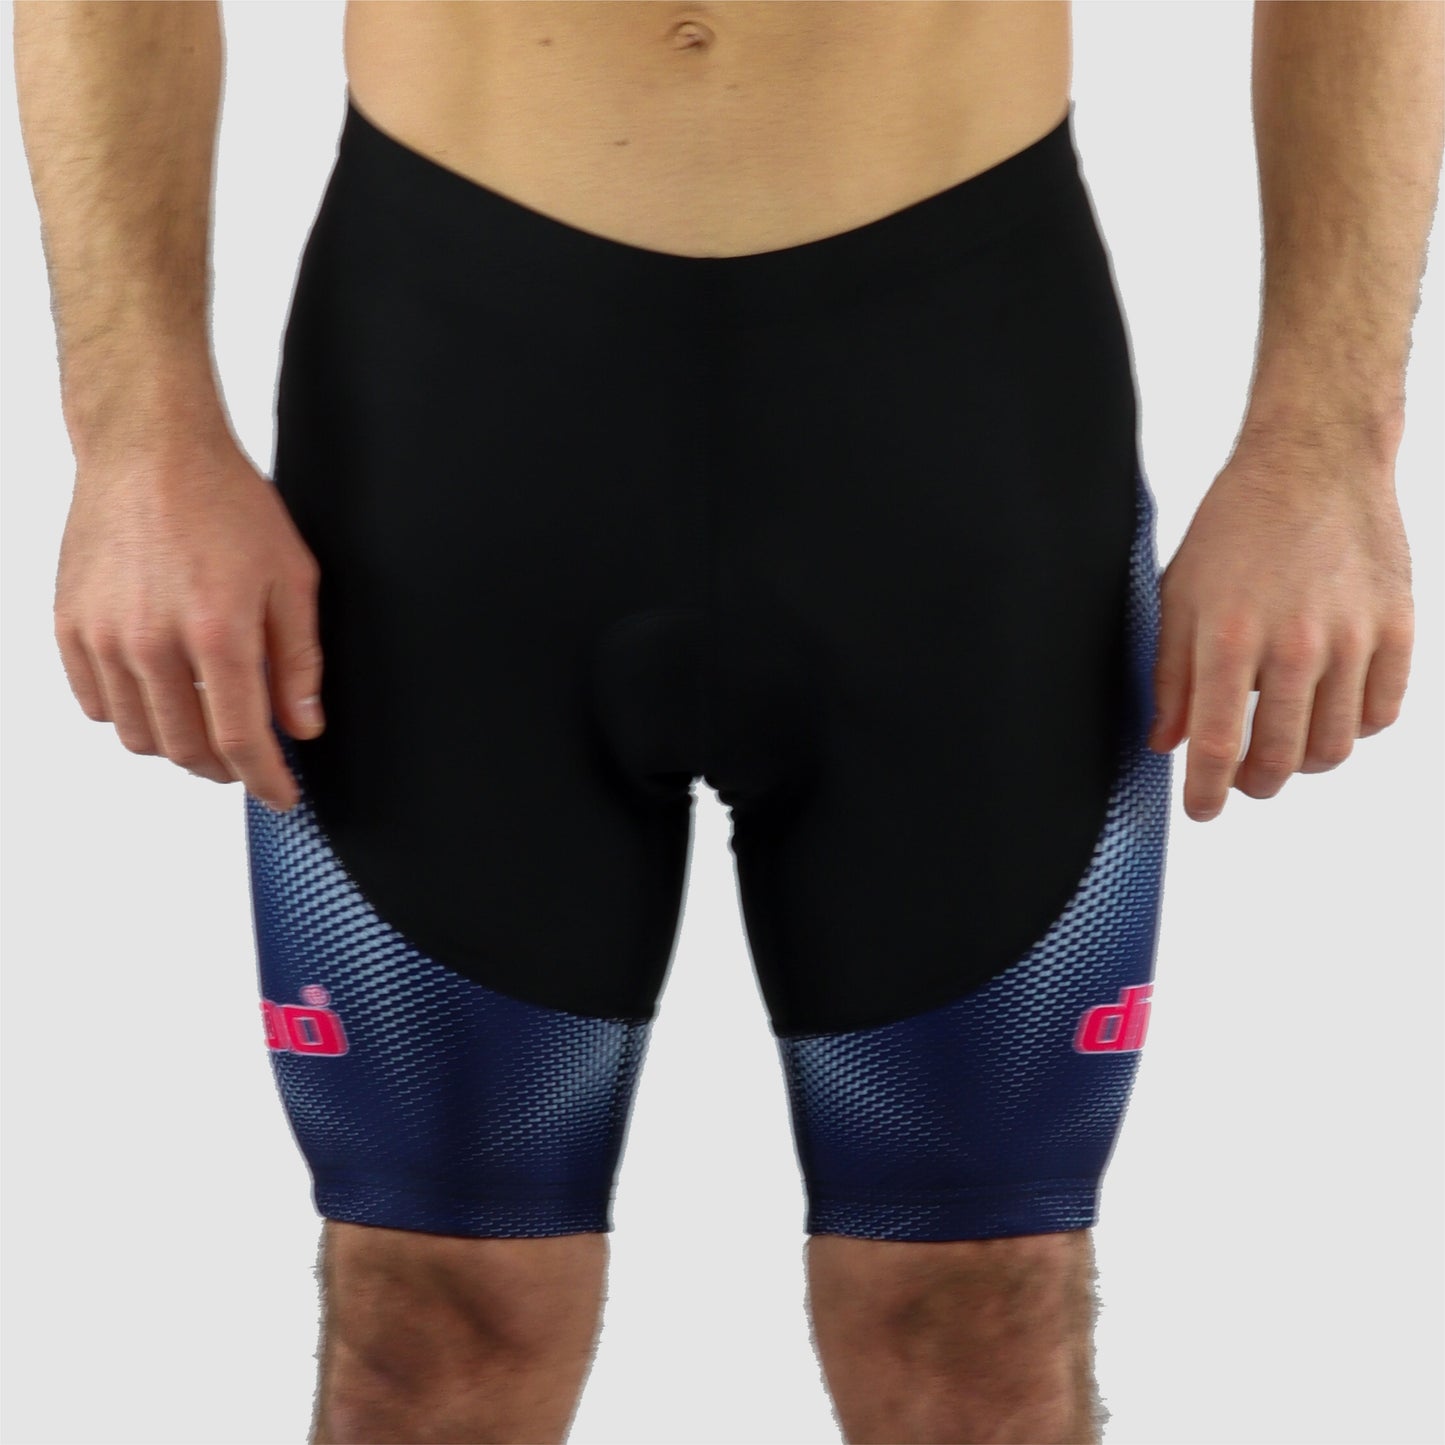 DiDOO Men's Classic Quick Dry Padded Cycling Shorts Black and Navy Blue